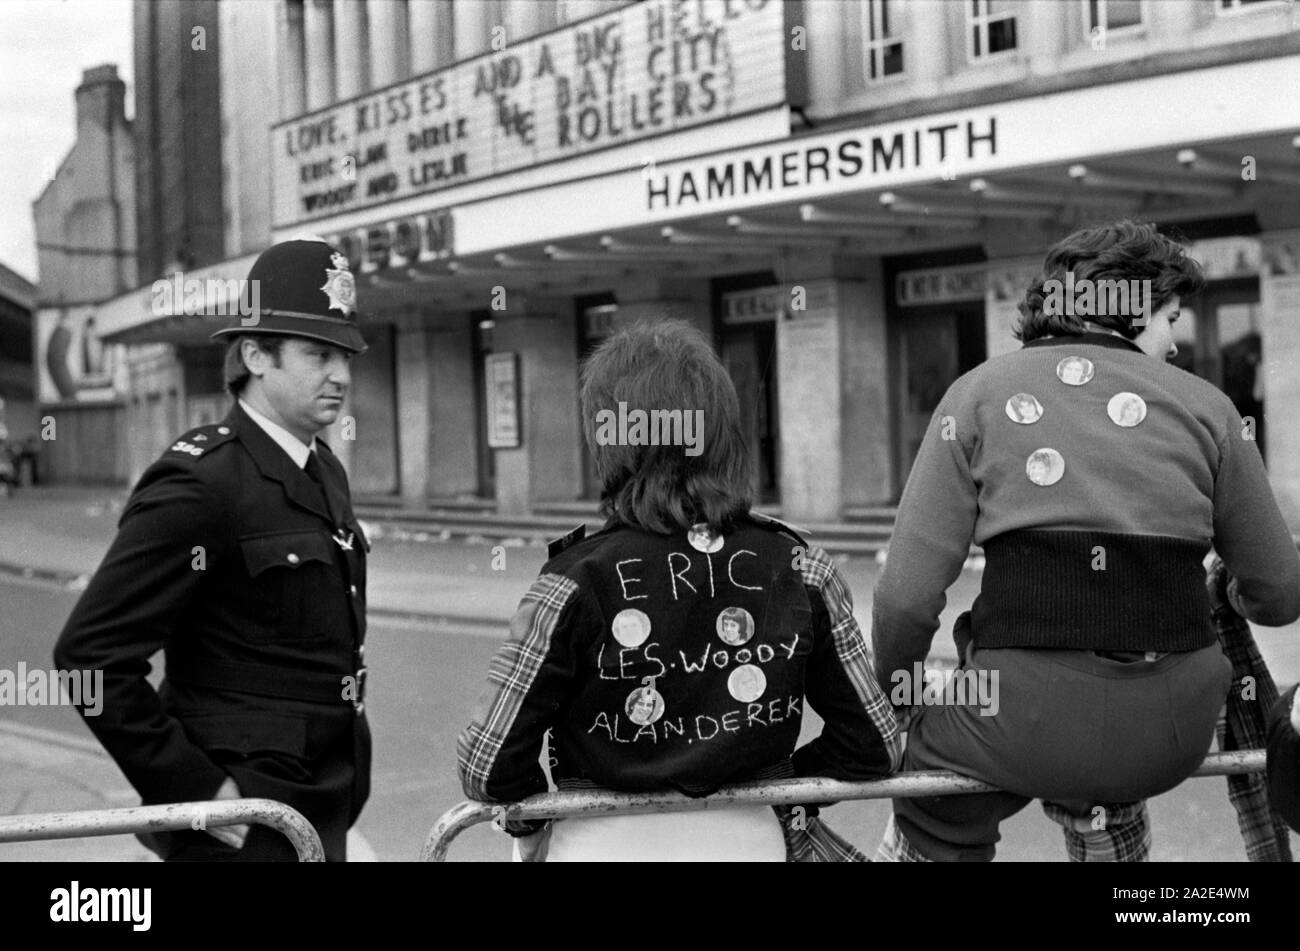 Bay City Roller Fans pop group leave pop concert at Hammersmith Odeon, west London 1975. They are wearing the Bay City Roller tartan fashion 1970s Policeman on duty chatting to teenagers. 70s England HOMER SYKES Stock Photo